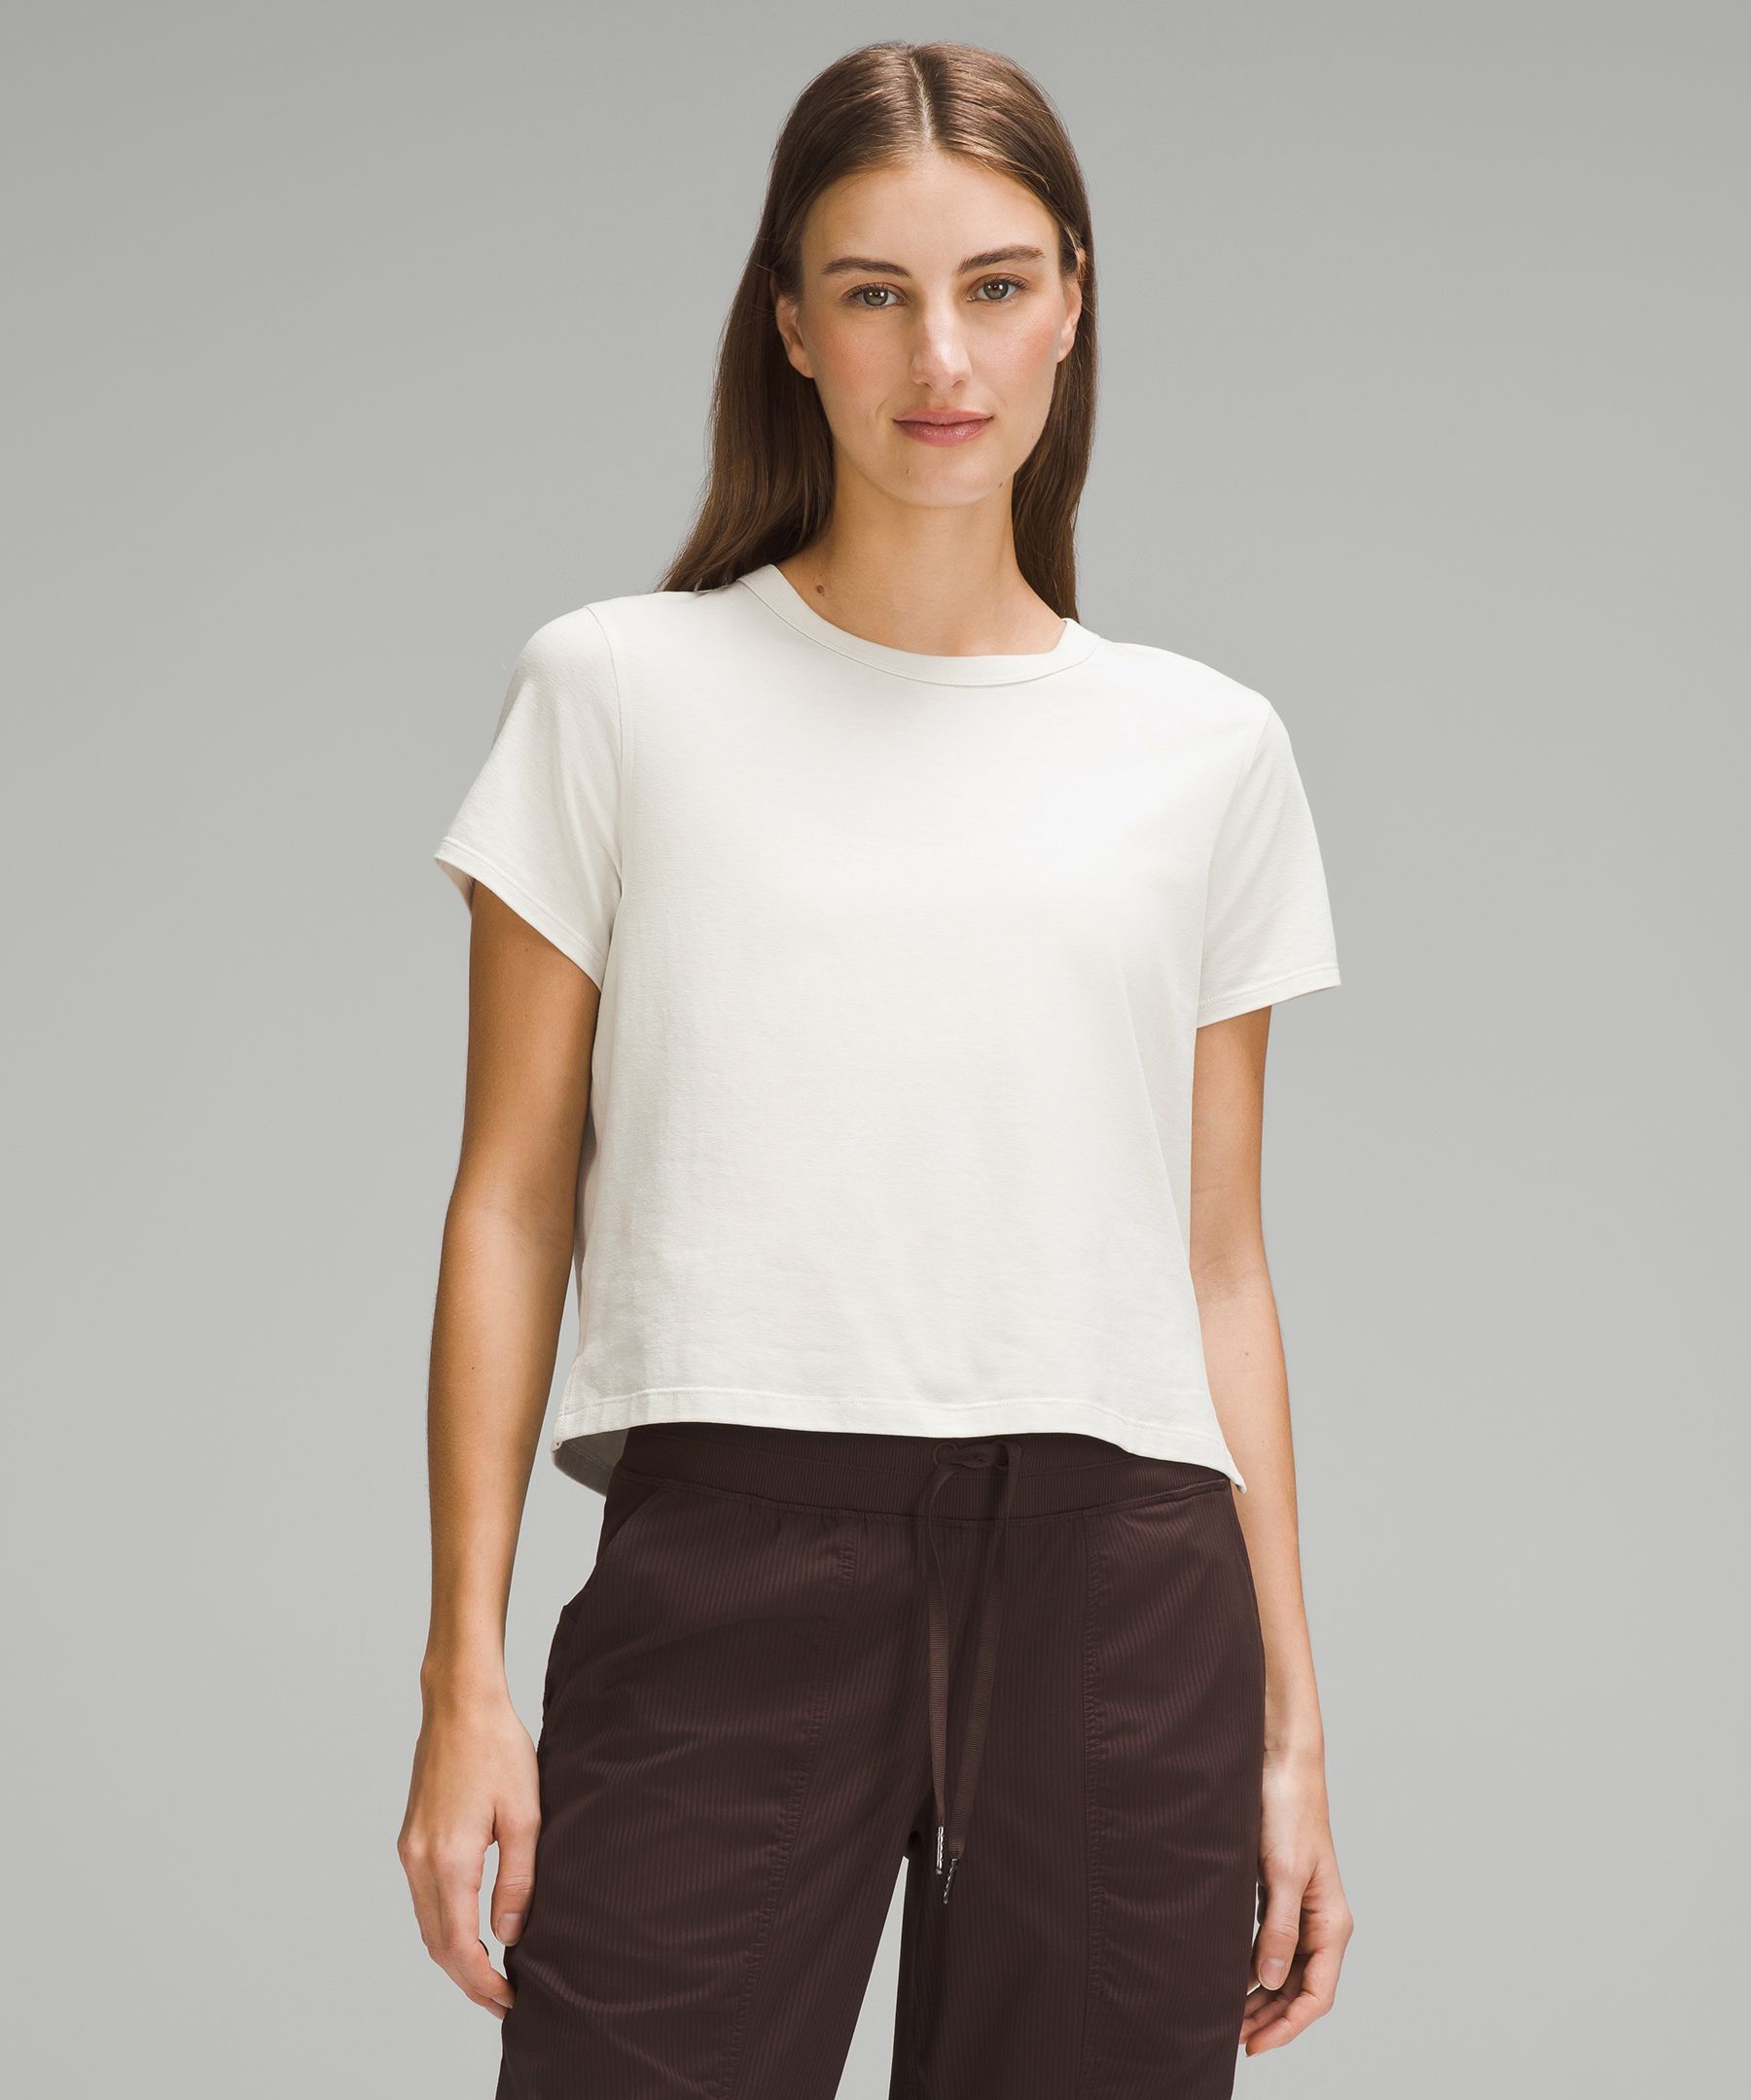 Lululemon Canada We Made Too Much Sales: Classic-Fit Cotton-Blend T-Shirt  for $29 + FREE Shipping! - Canadian Freebies, Coupons, Deals, Bargains,  Flyers, Contests Canada Canadian Freebies, Coupons, Deals, Bargains,  Flyers, Contests Canada